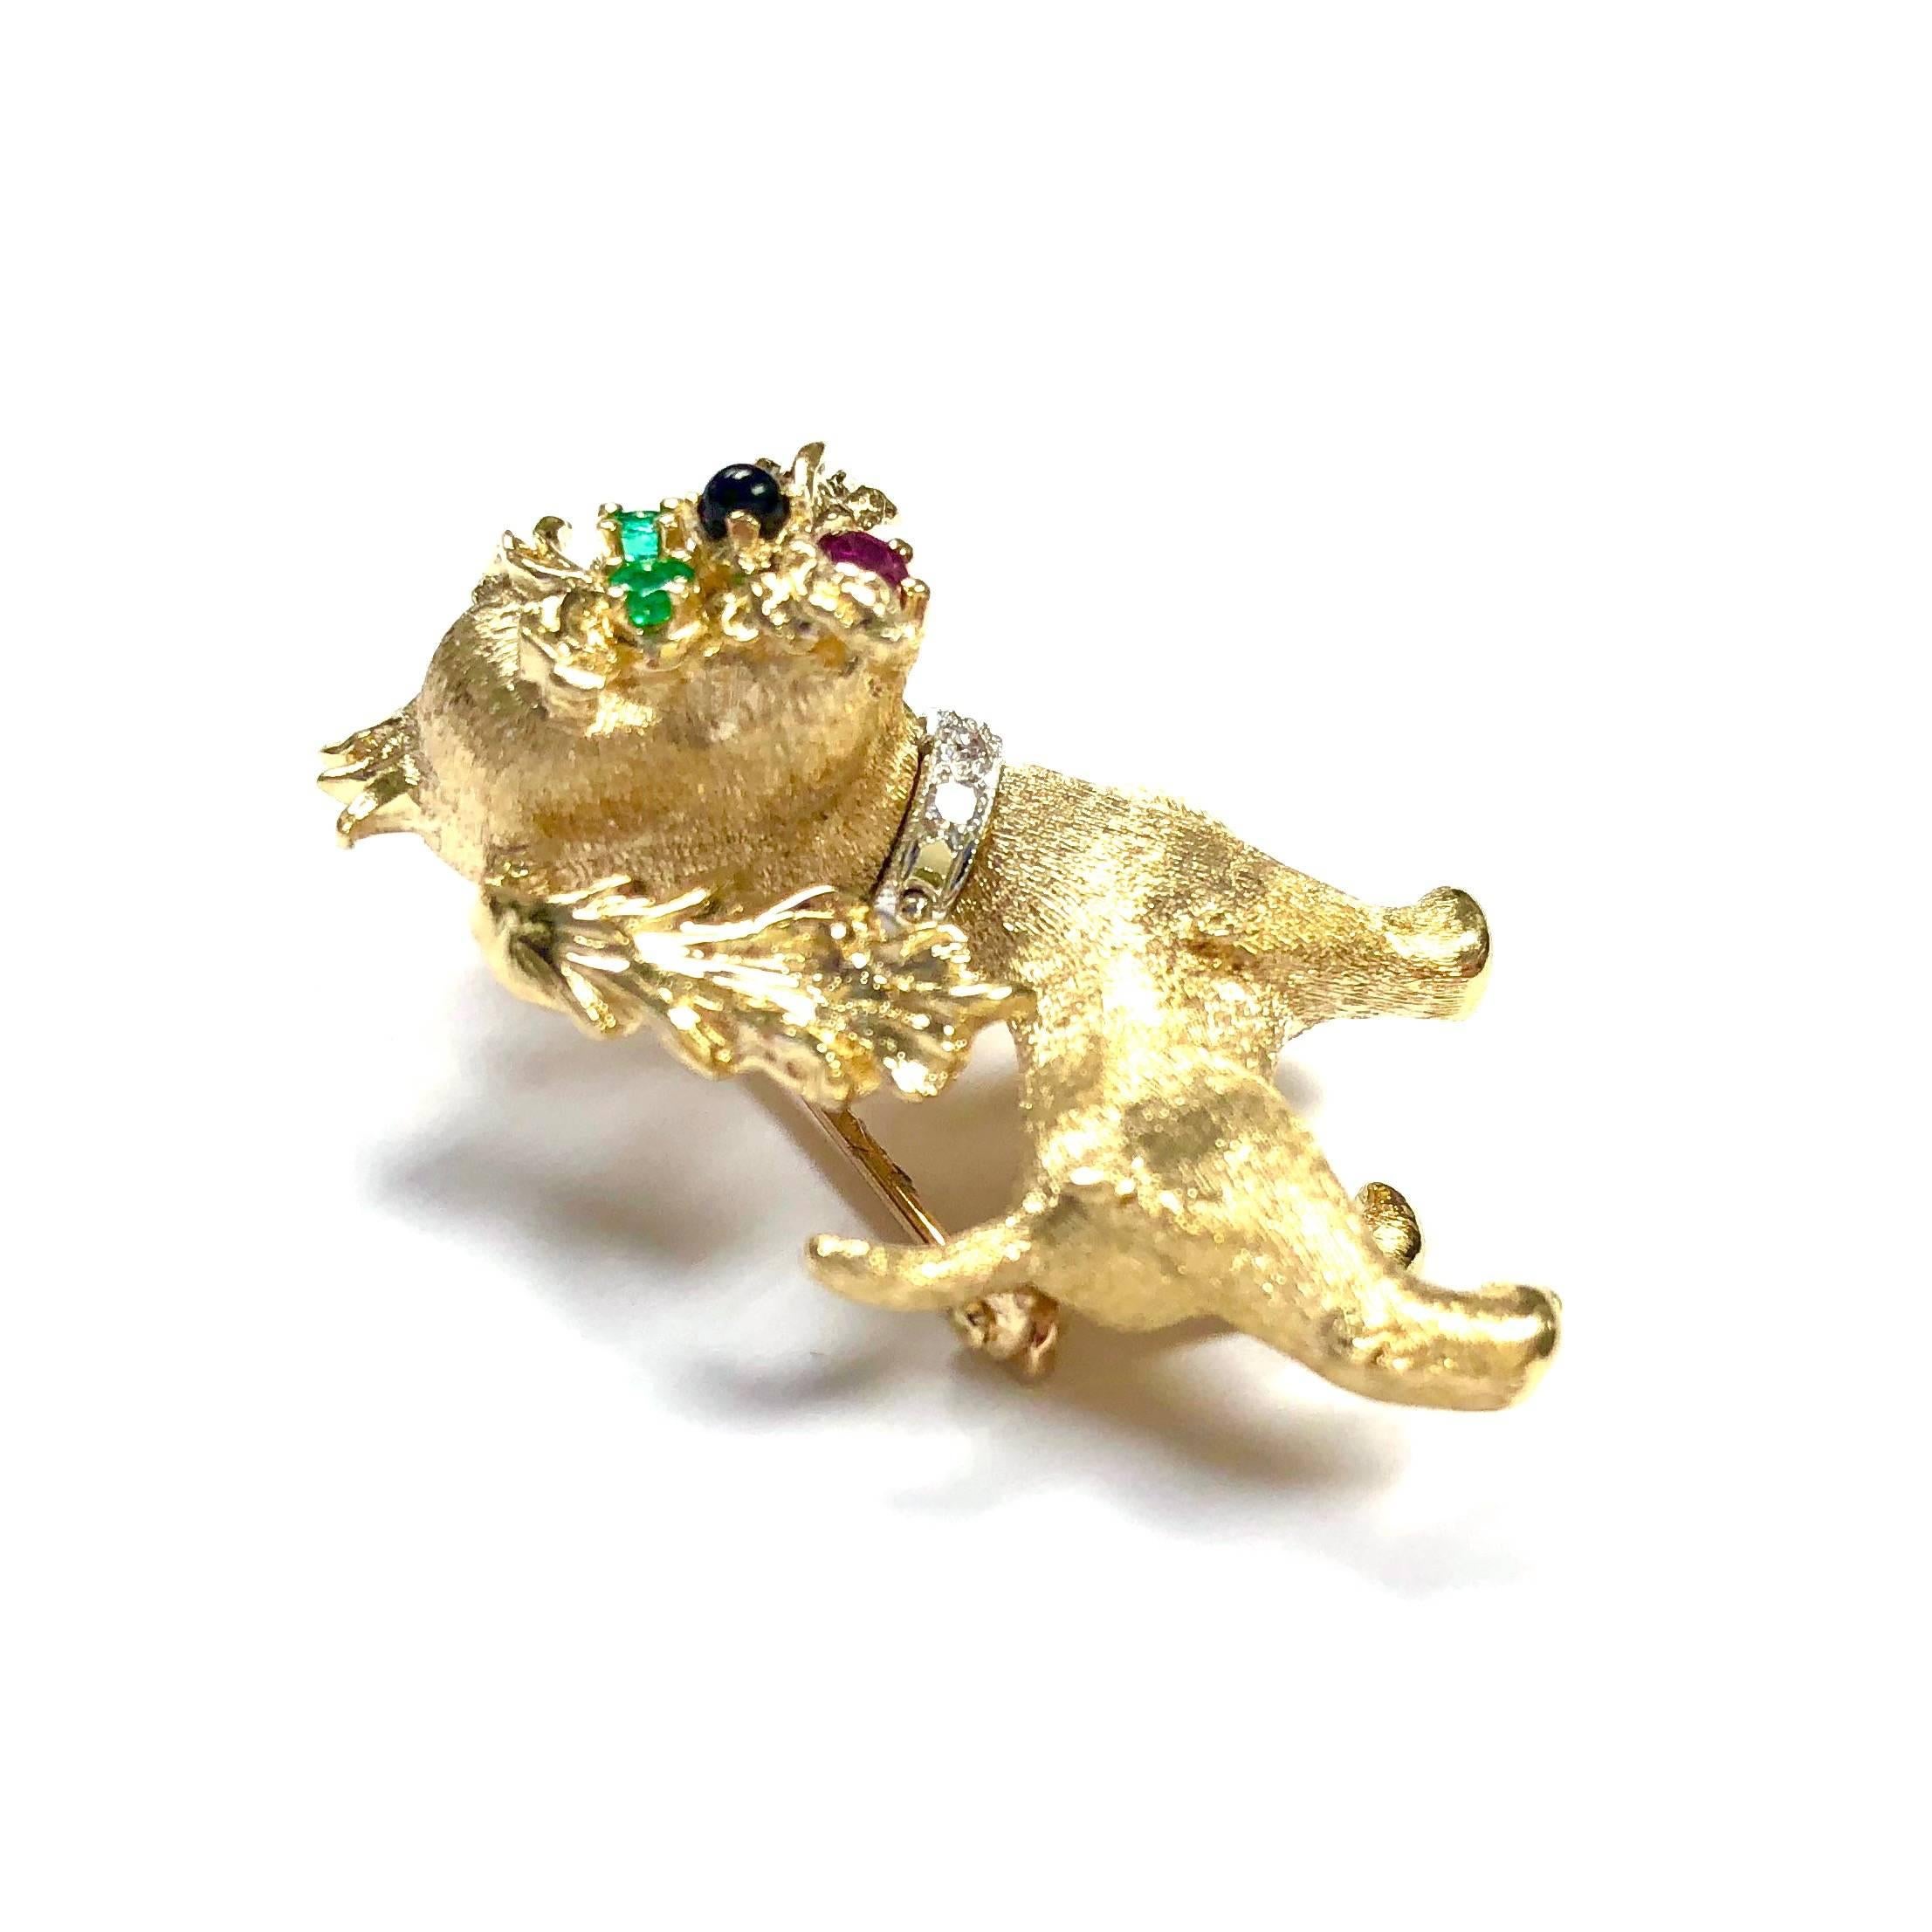 Crafted in 14K gold, featuring a dog accented with emerald eyes, a ruby in it's mouth and three diamonds set in it's white gold collar. 
Measurement: 1 1/8" H x 1 1/16" W
Marked: DAN FRERE  14K COPYRIGHT
Weight: 7.9 grams